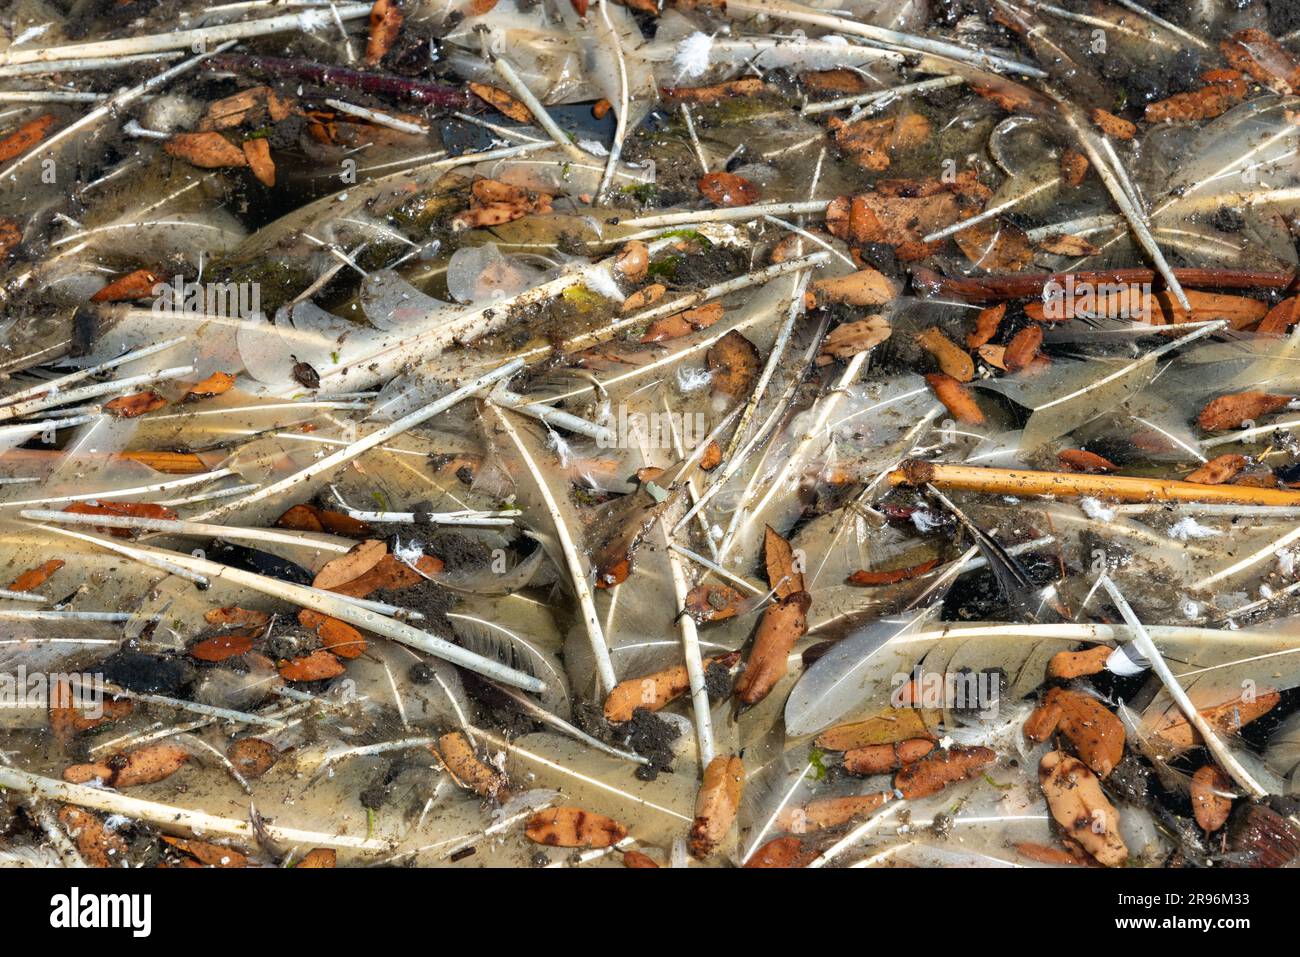 Floating debris on a lake, consisting of bird feather, leaves and general rubbish. Stock Photo